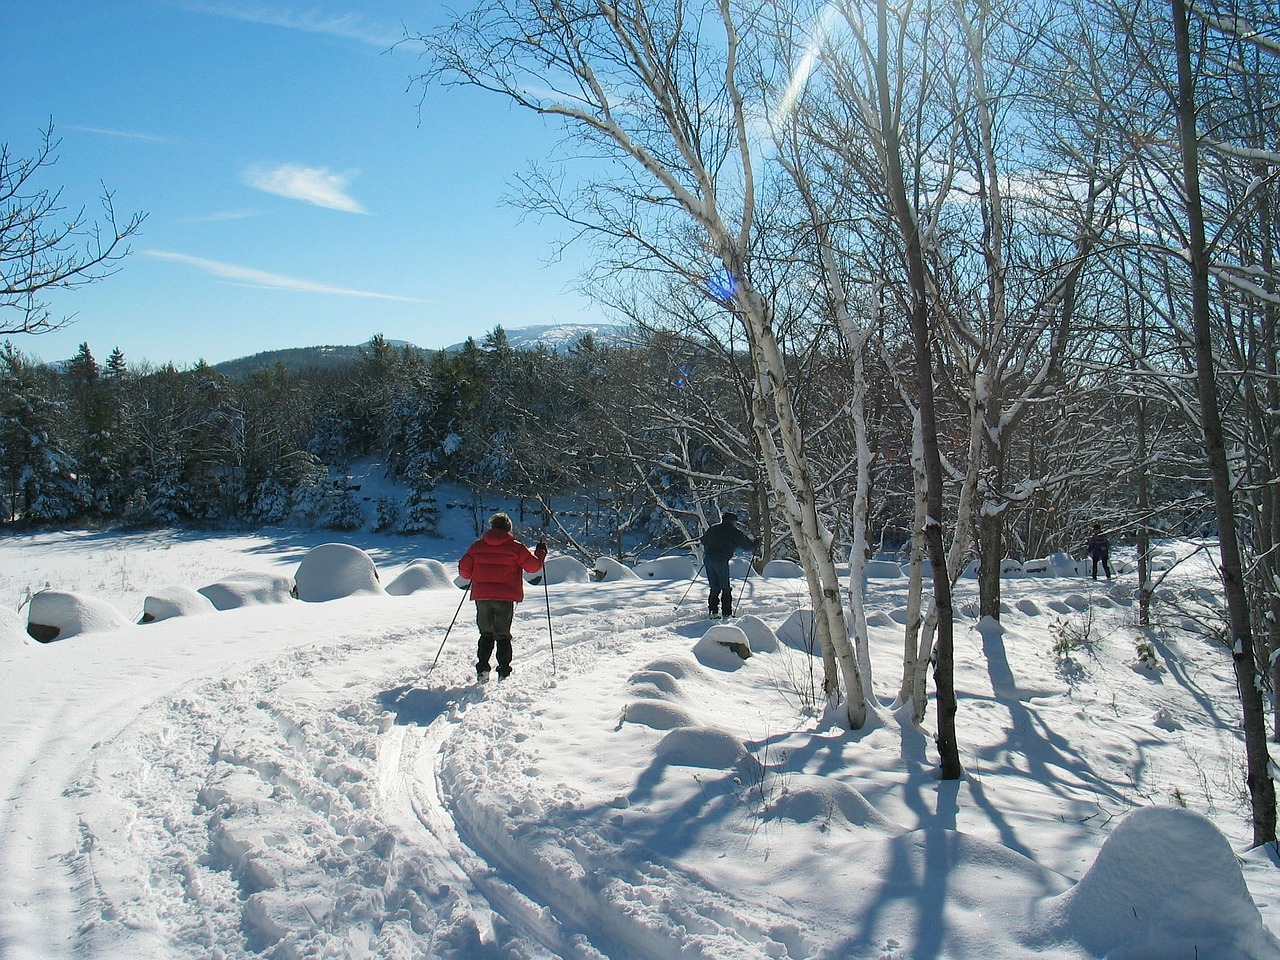  Cross country skiing and snow shoeing are popular sports along the carriage roads in winter 